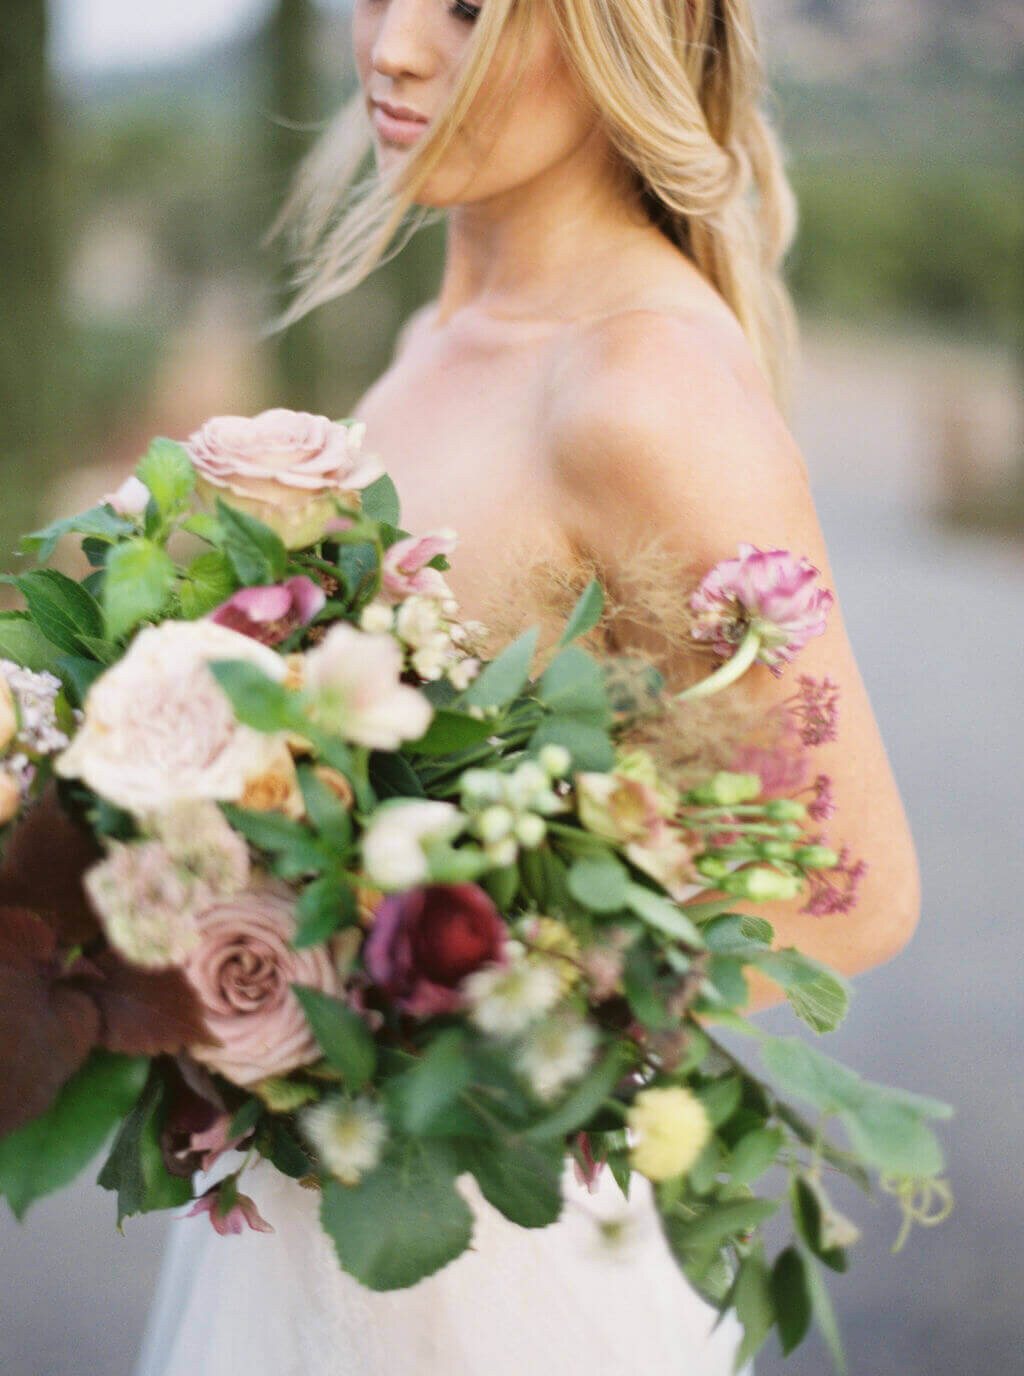 Bride holding a bouquet with white and muted pink flowers